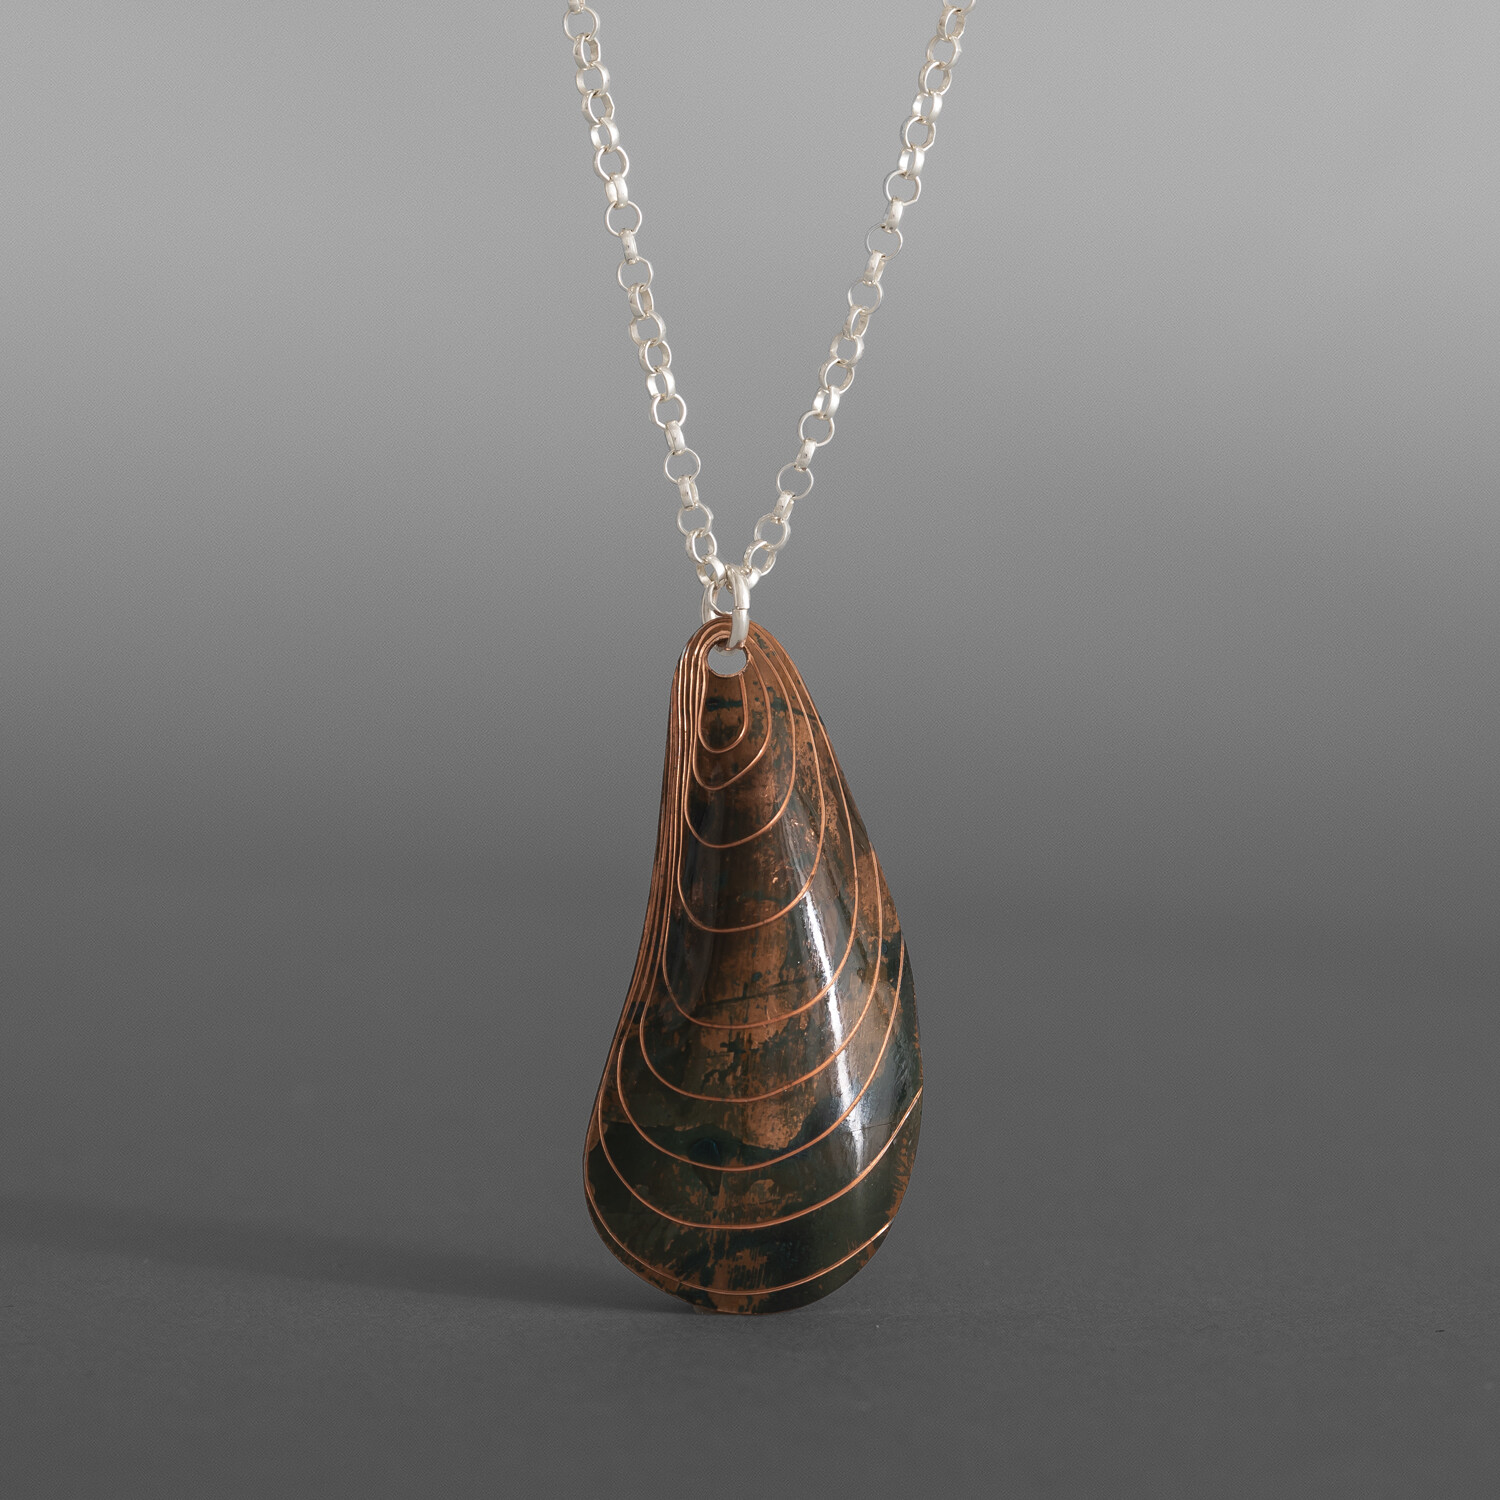 Mussell Shell Pendant
Jennifer Younger
Tlingit
Copper, silver chain